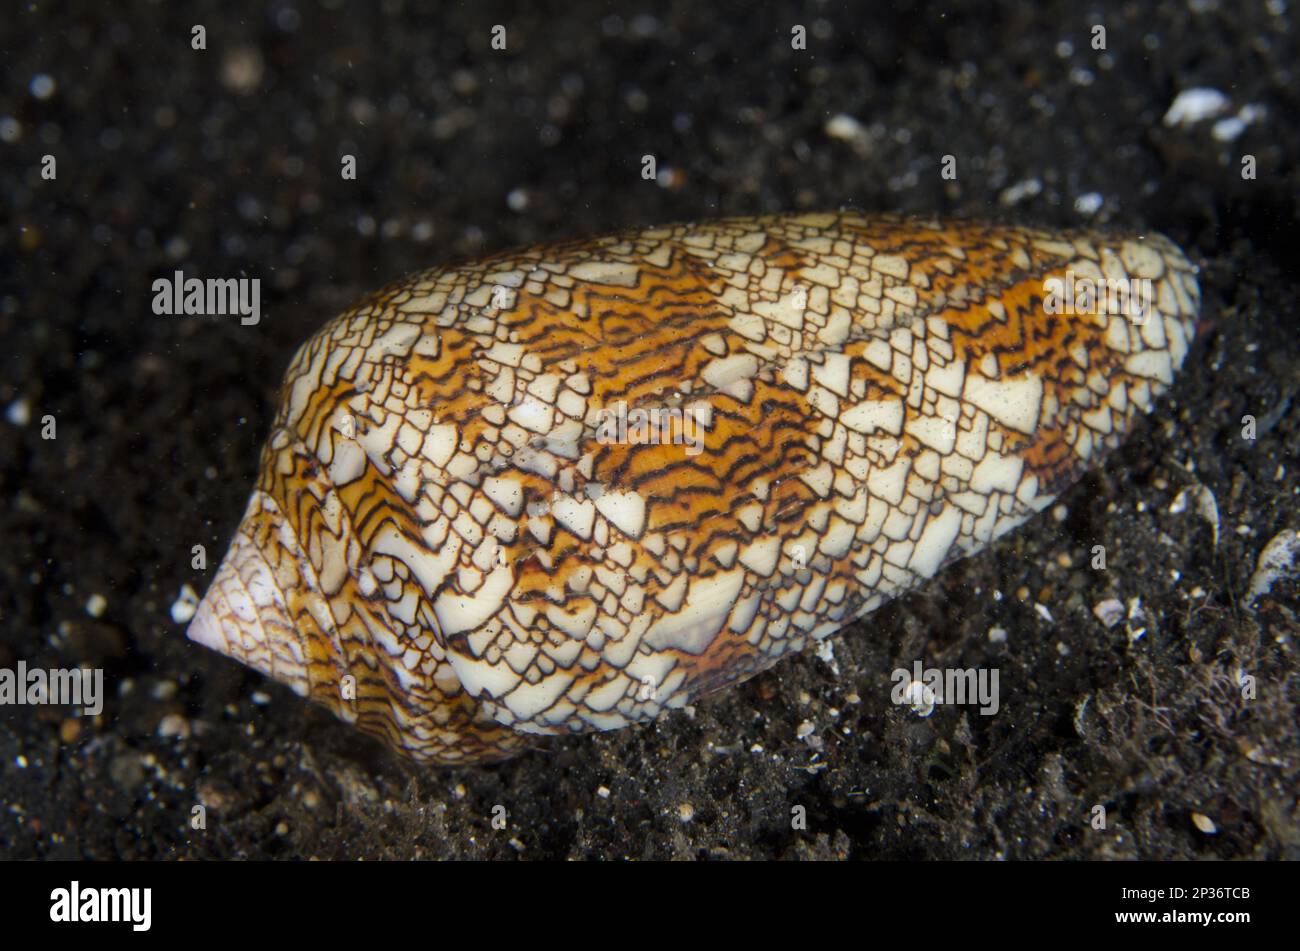 Geography cone (Conus geographus), Other Animals, Marine Snails, Snails, Animals, Molluscs, Geography Cone Shell adult, on black sand at night Stock Photo